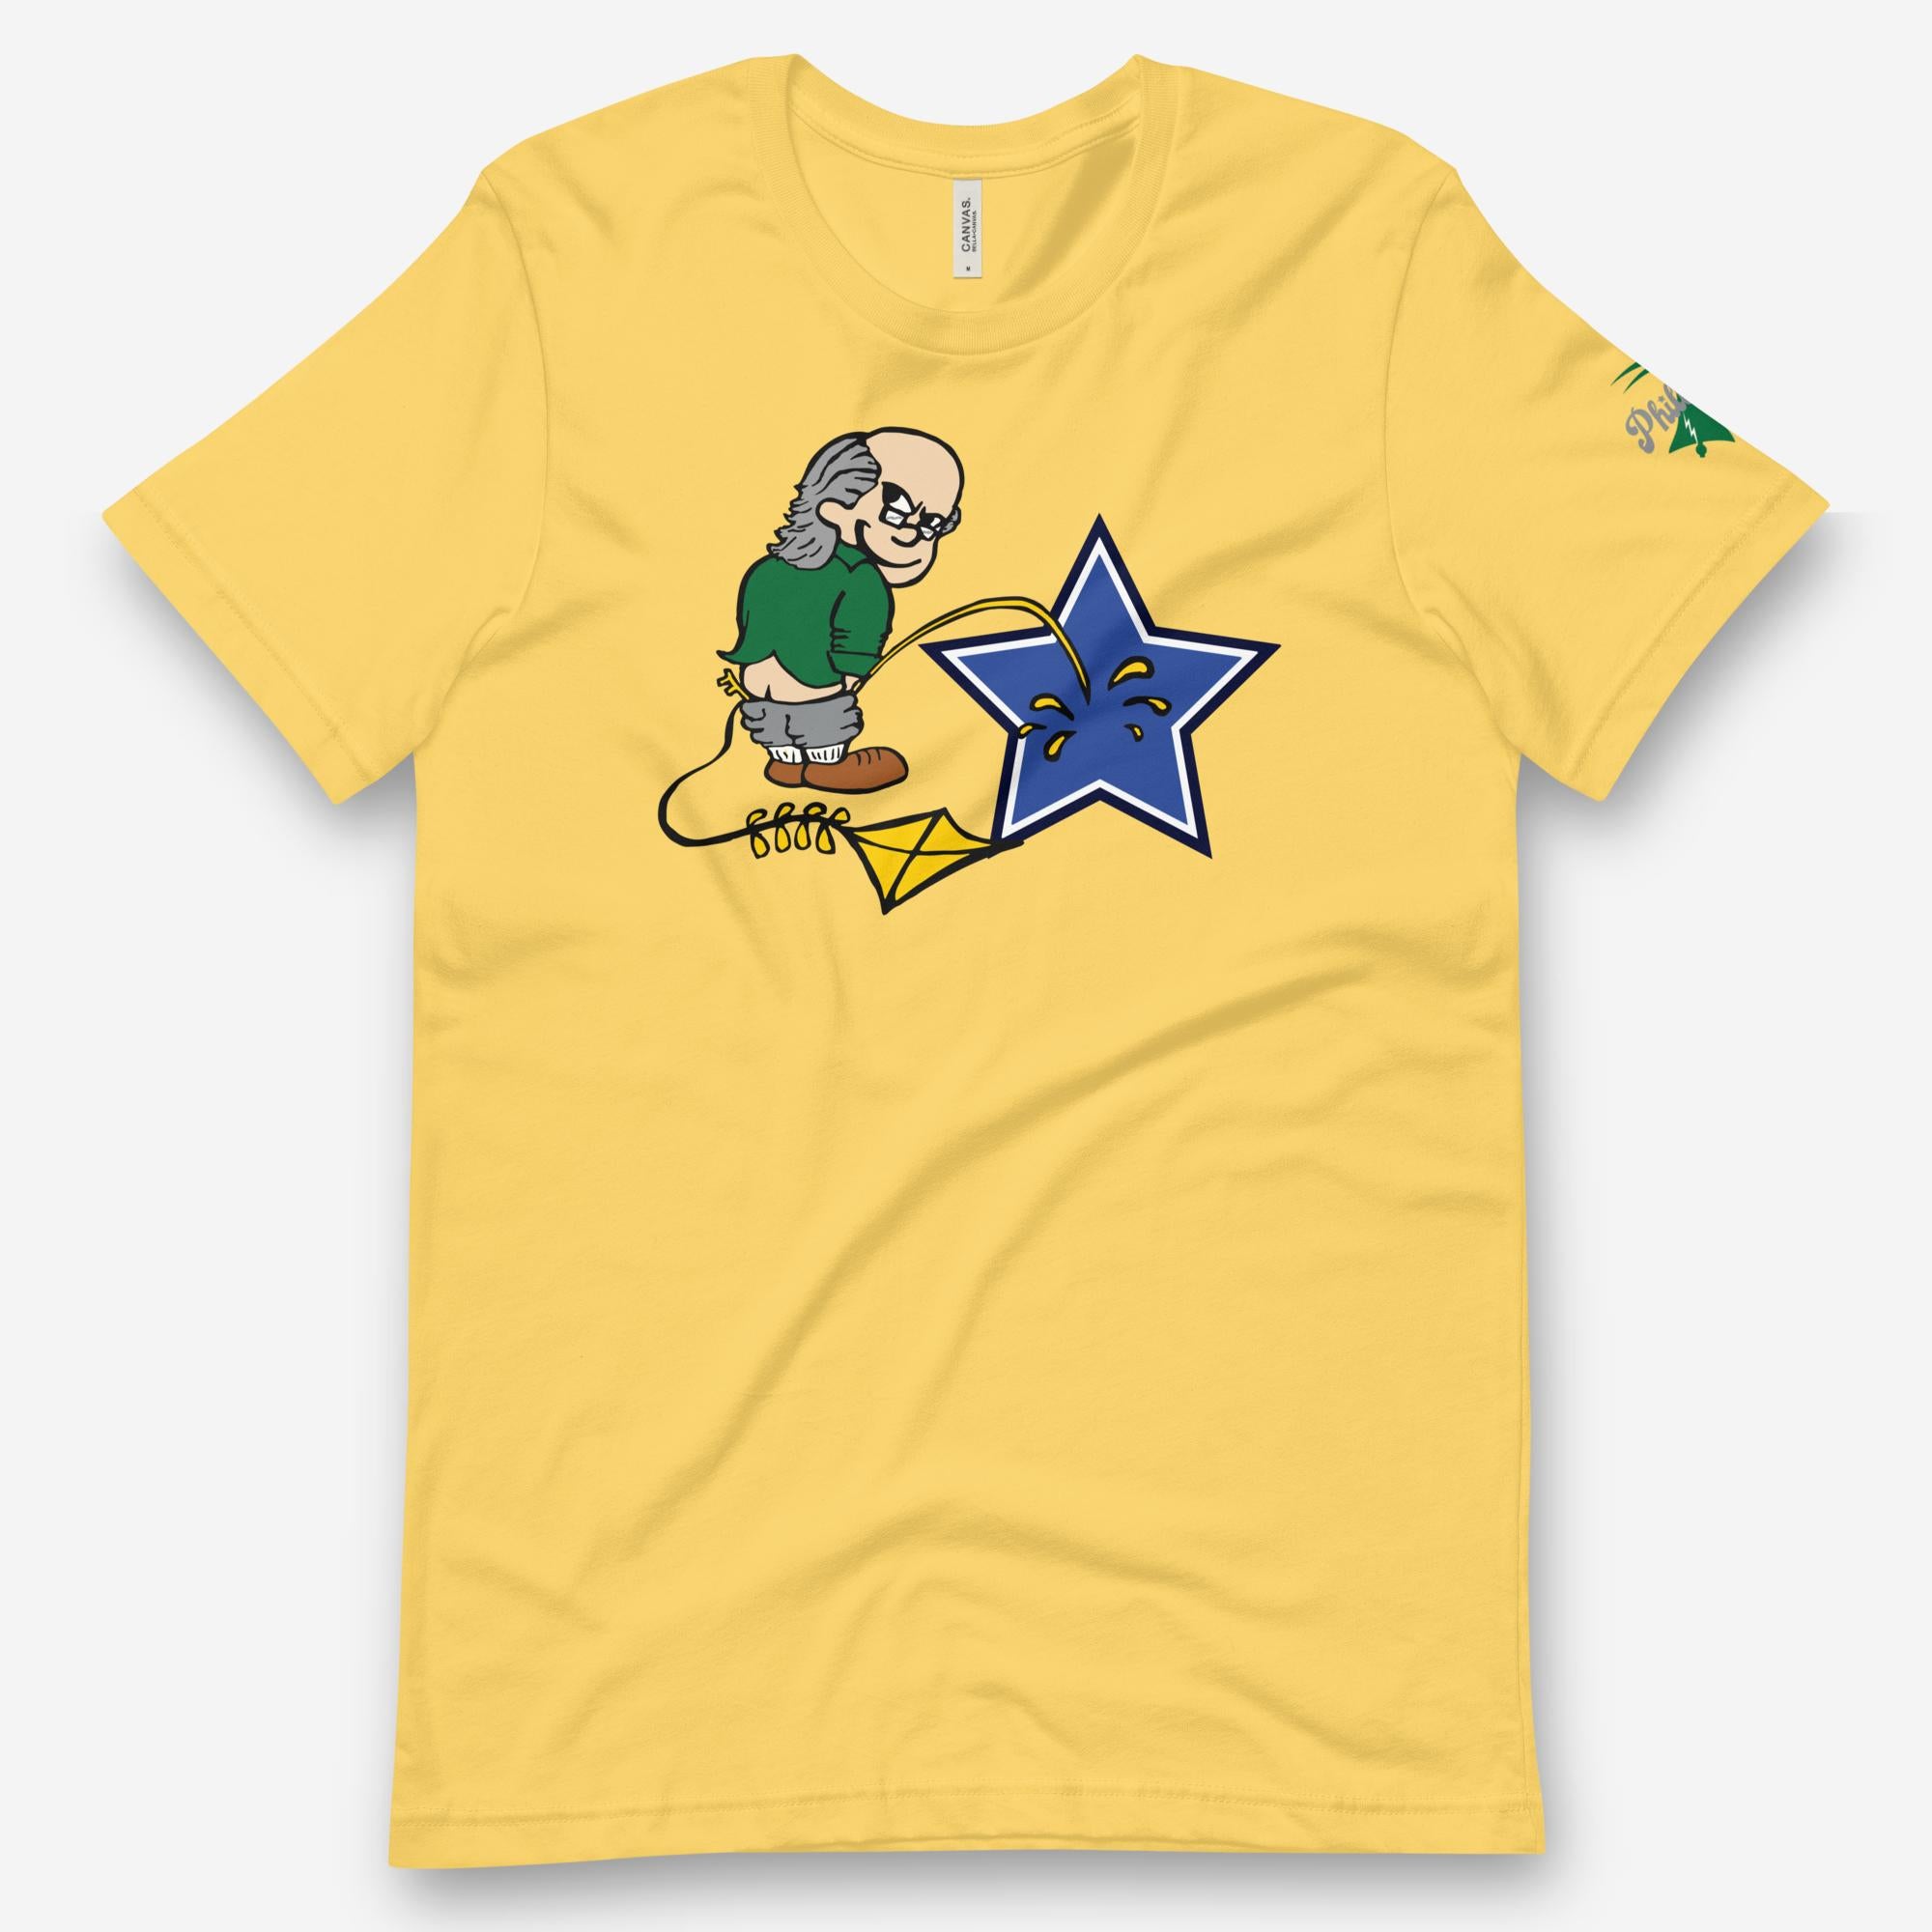 "Ben Franklin Whizzing on the Blue Star" Tee